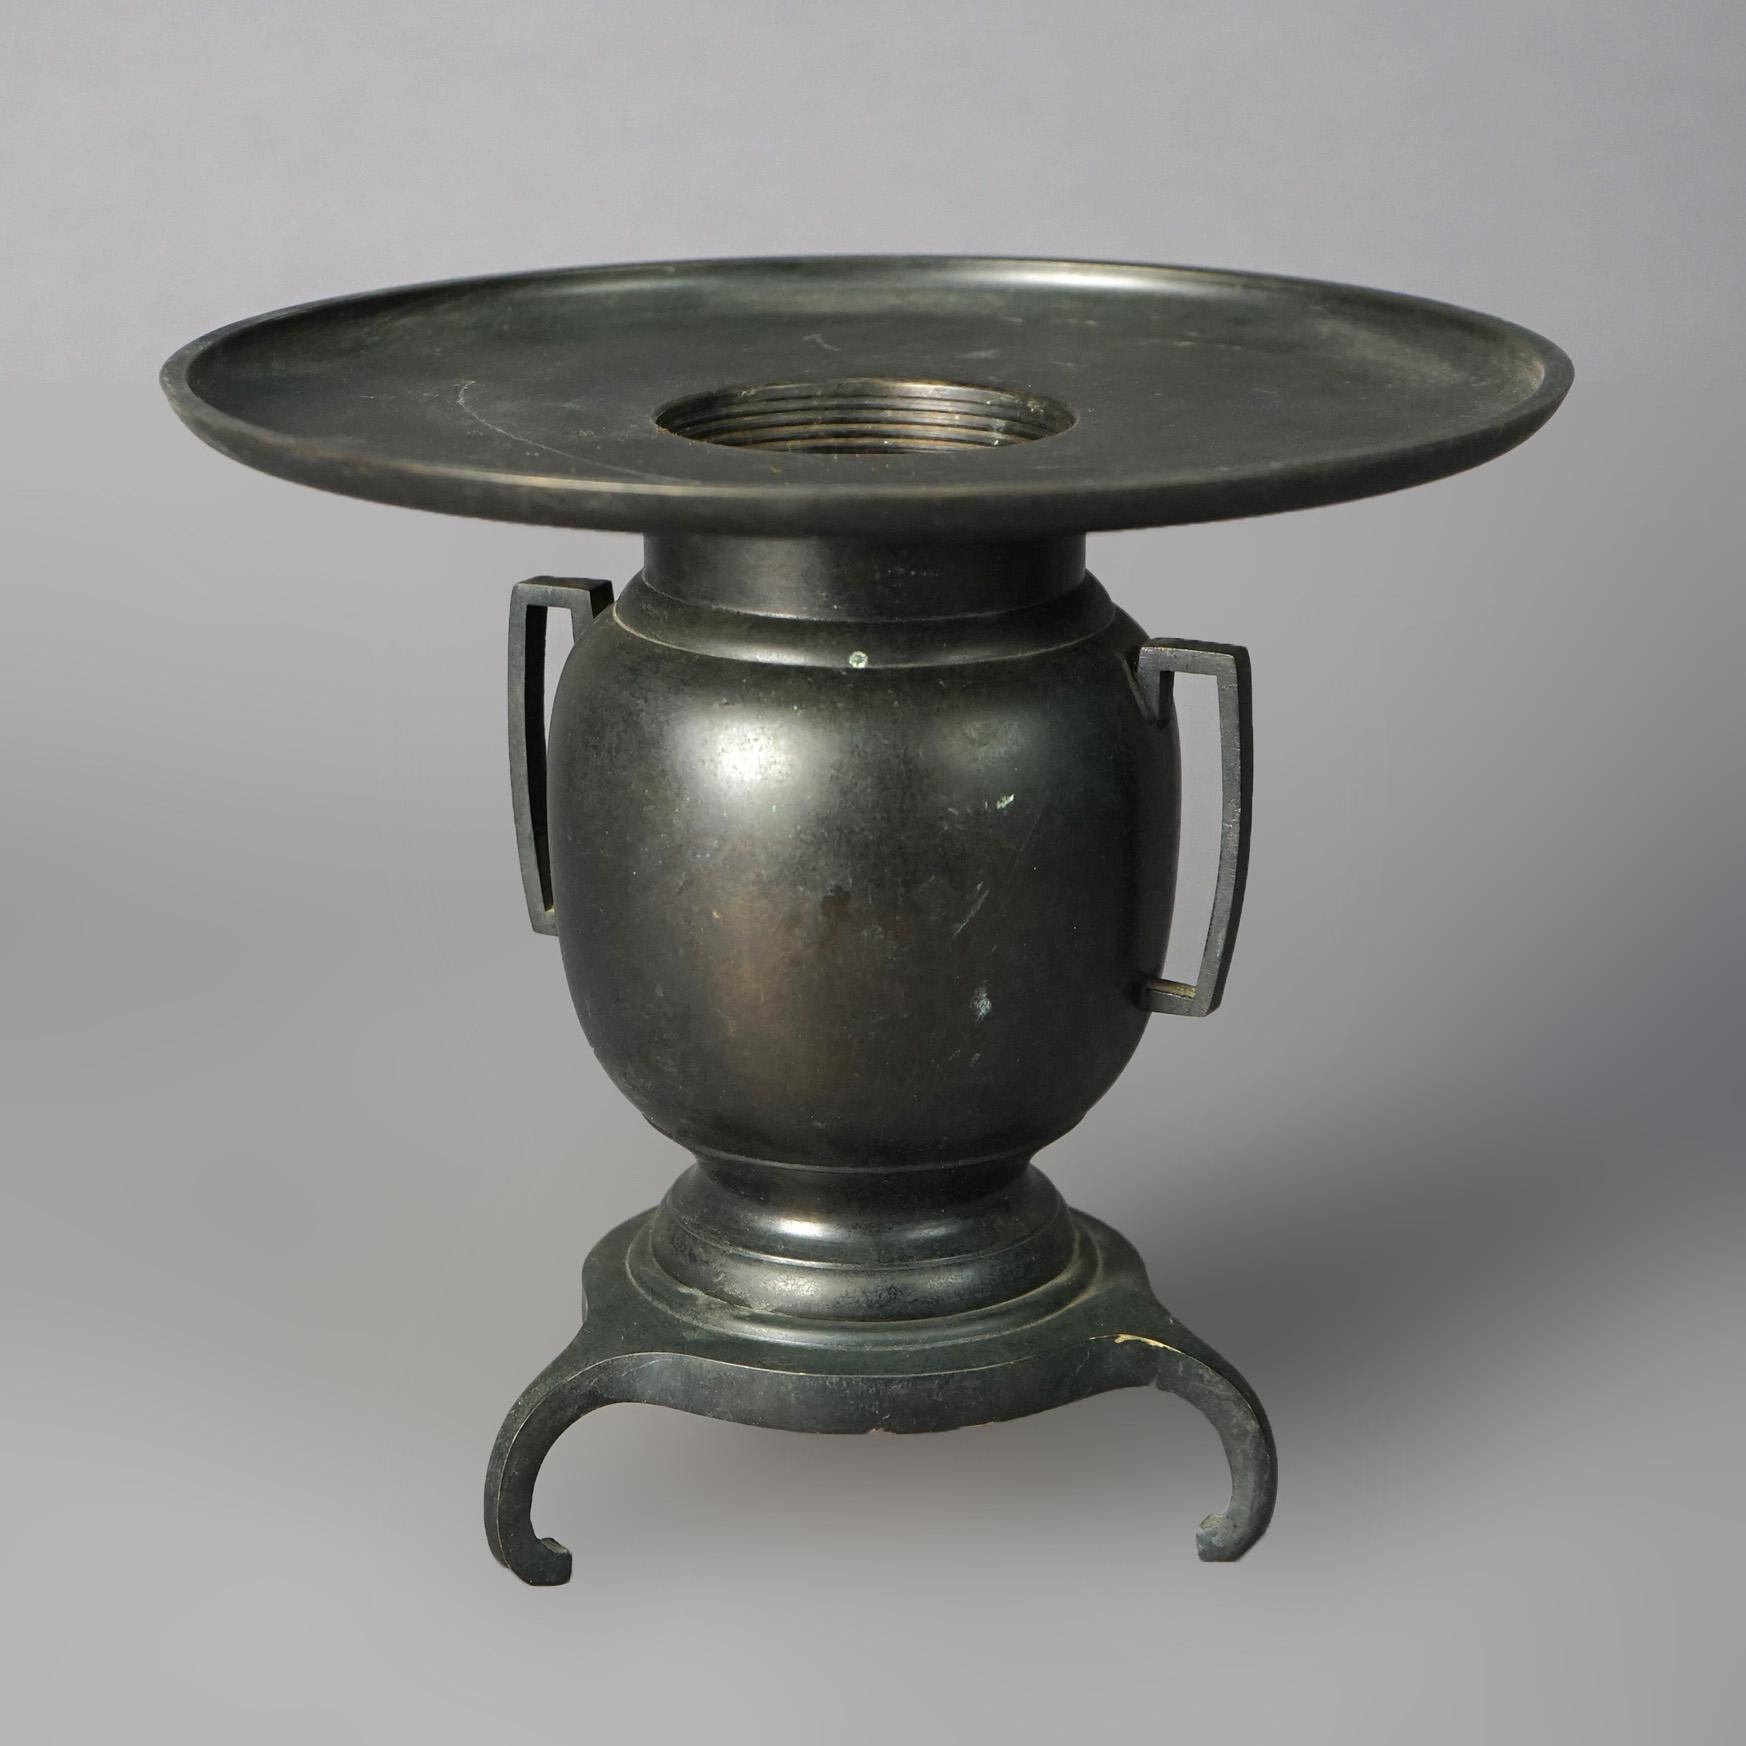 An antique Chinese censor offers bronze construction in urn form with oversized lip, double handles and feet, 19th century

Measures - 8.25